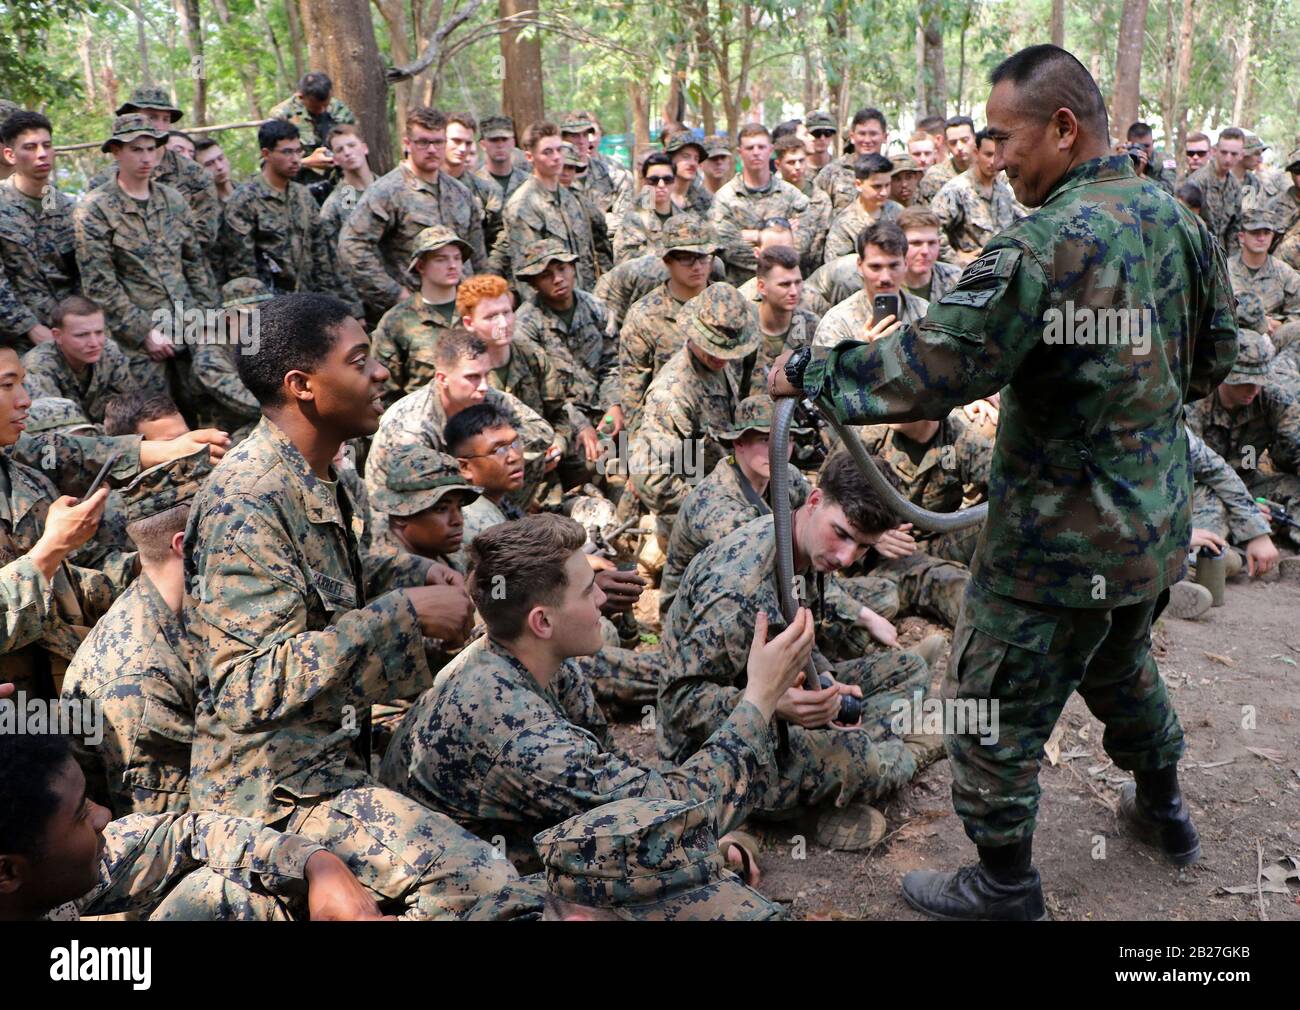 Chanthaburi, Thailand. 1st Mar, 2020. US Marines take a jungle survival training as part of the military exercise Cobra Gold 2020 at a Navy base in Chanthaburi province. March 01, 2020. The 39th annual Cobra Gold military exercise is an event held between the Thai and US armed forces every year. It's the largest Asia-Pacific military exercise held each year, and is among the largest multinational military exercises in which the US participates. Credit: Urdee Image/ZUMA Wire/Alamy Live News Stock Photo